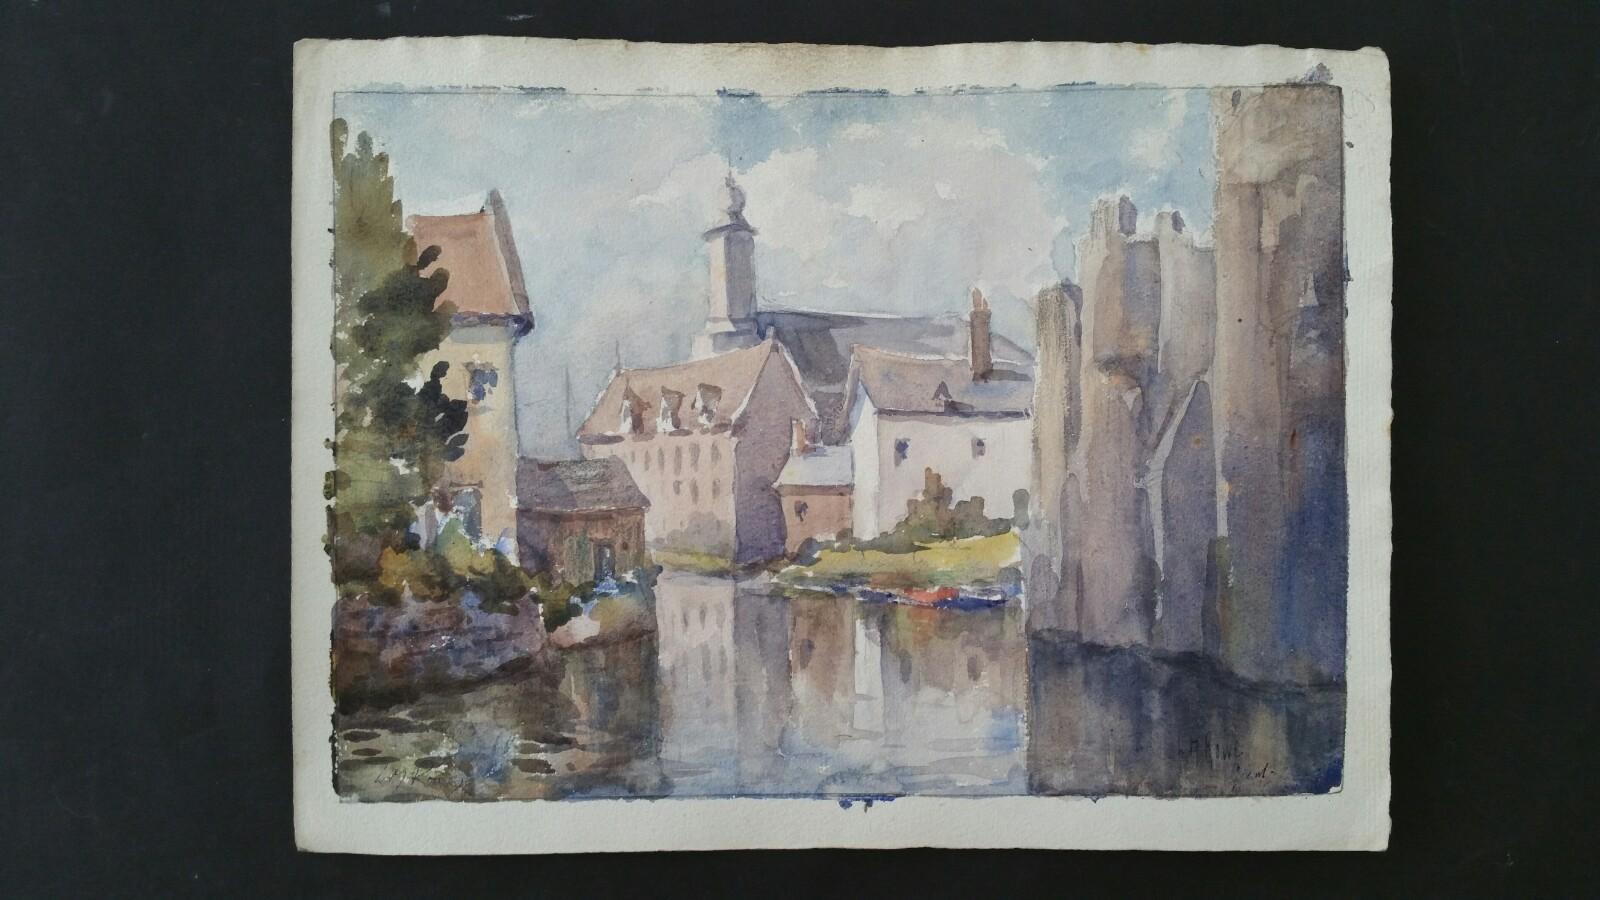 Mid 20th Century, Ghent, Belgium Chateau des Comtes from Hoofdbrug - Art by Leonard Machin Rowe